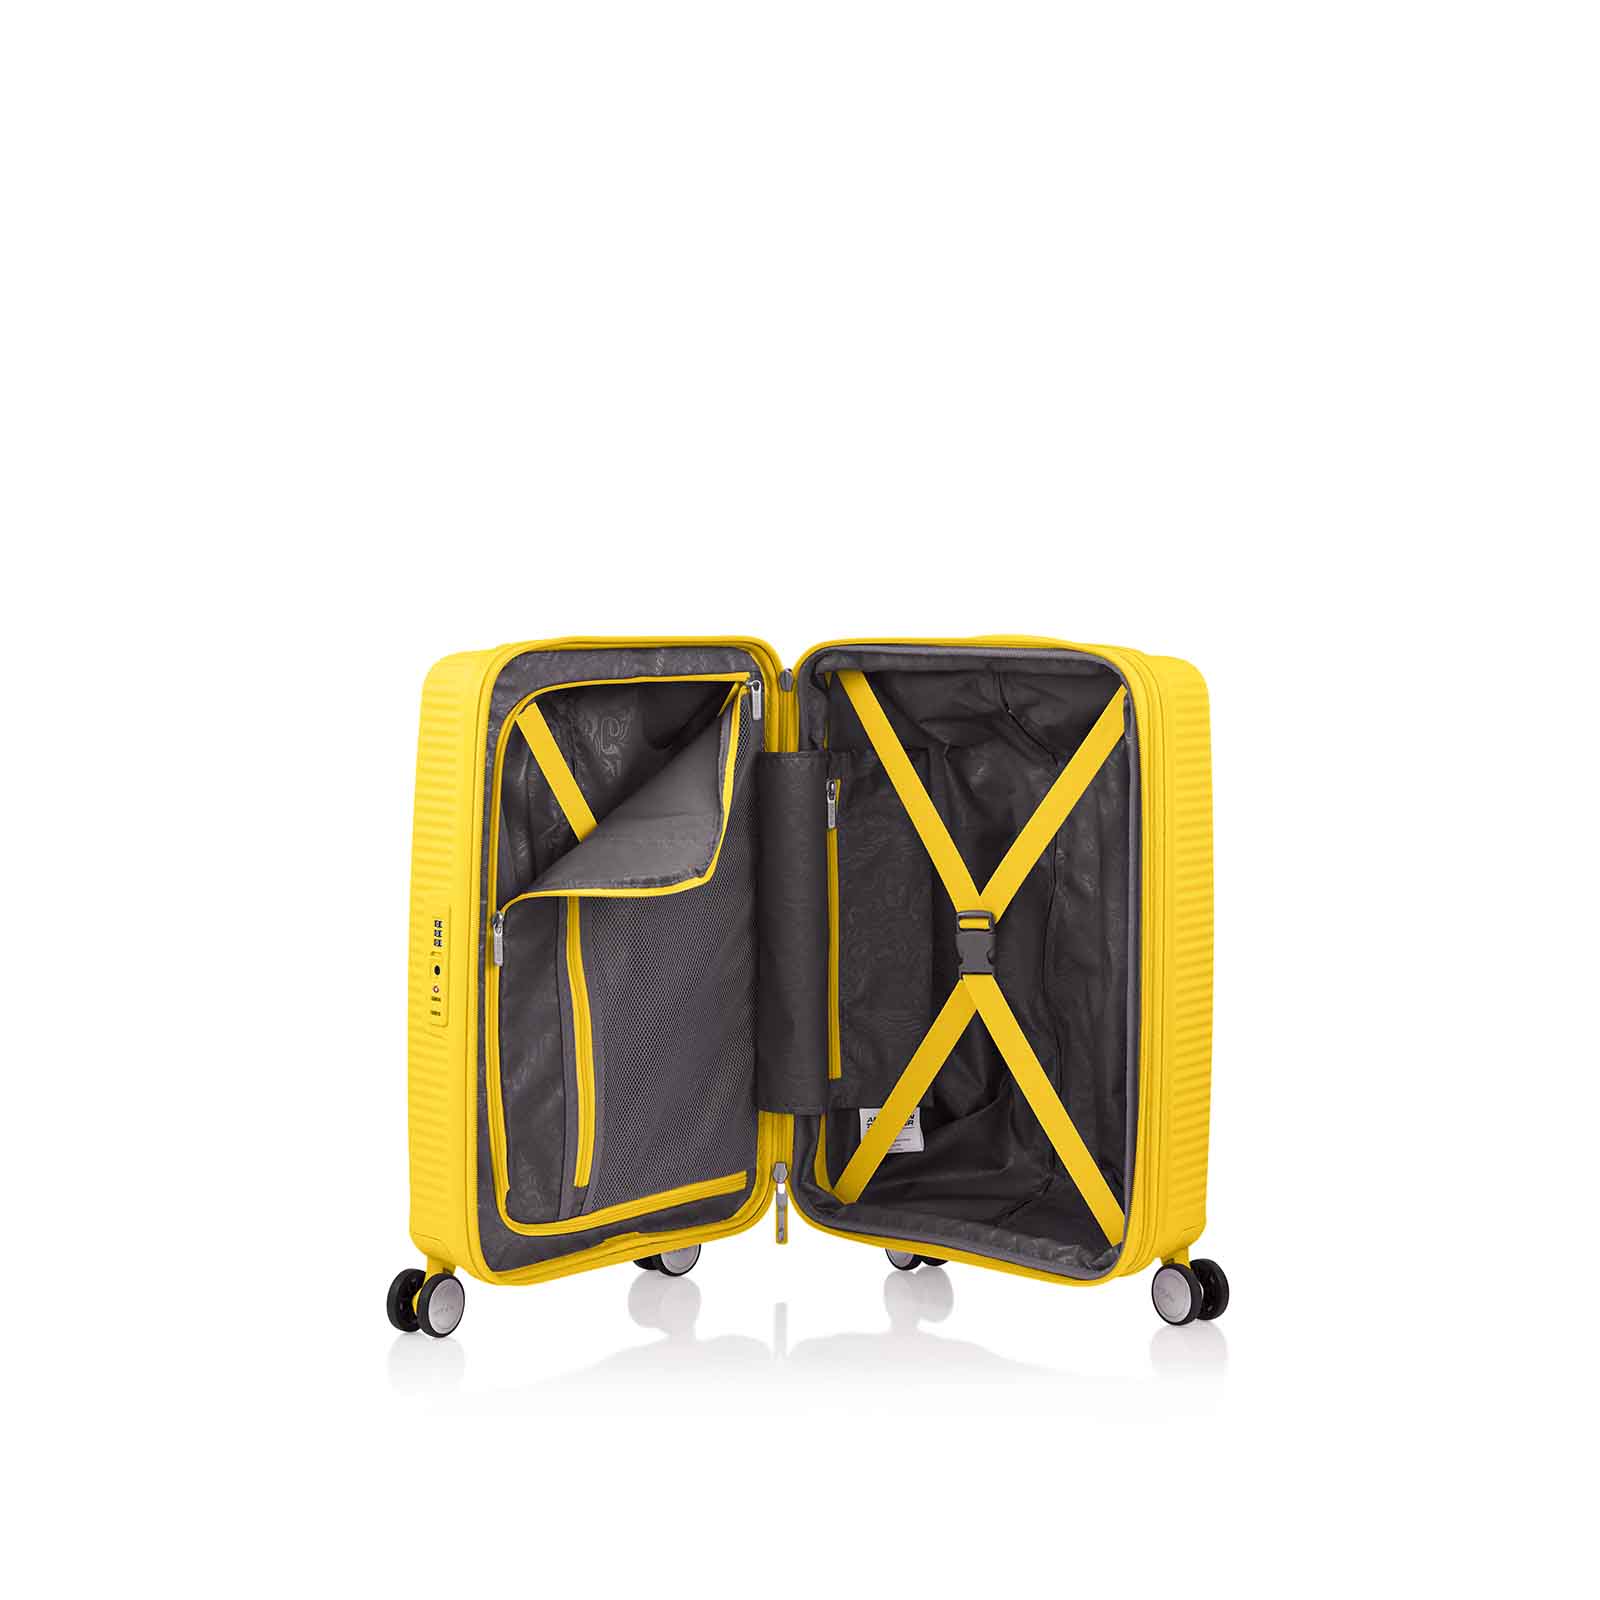 American-Tourister-Curio-2-55cm-Carry-On-Suitcase-Golden-Yellow-Open